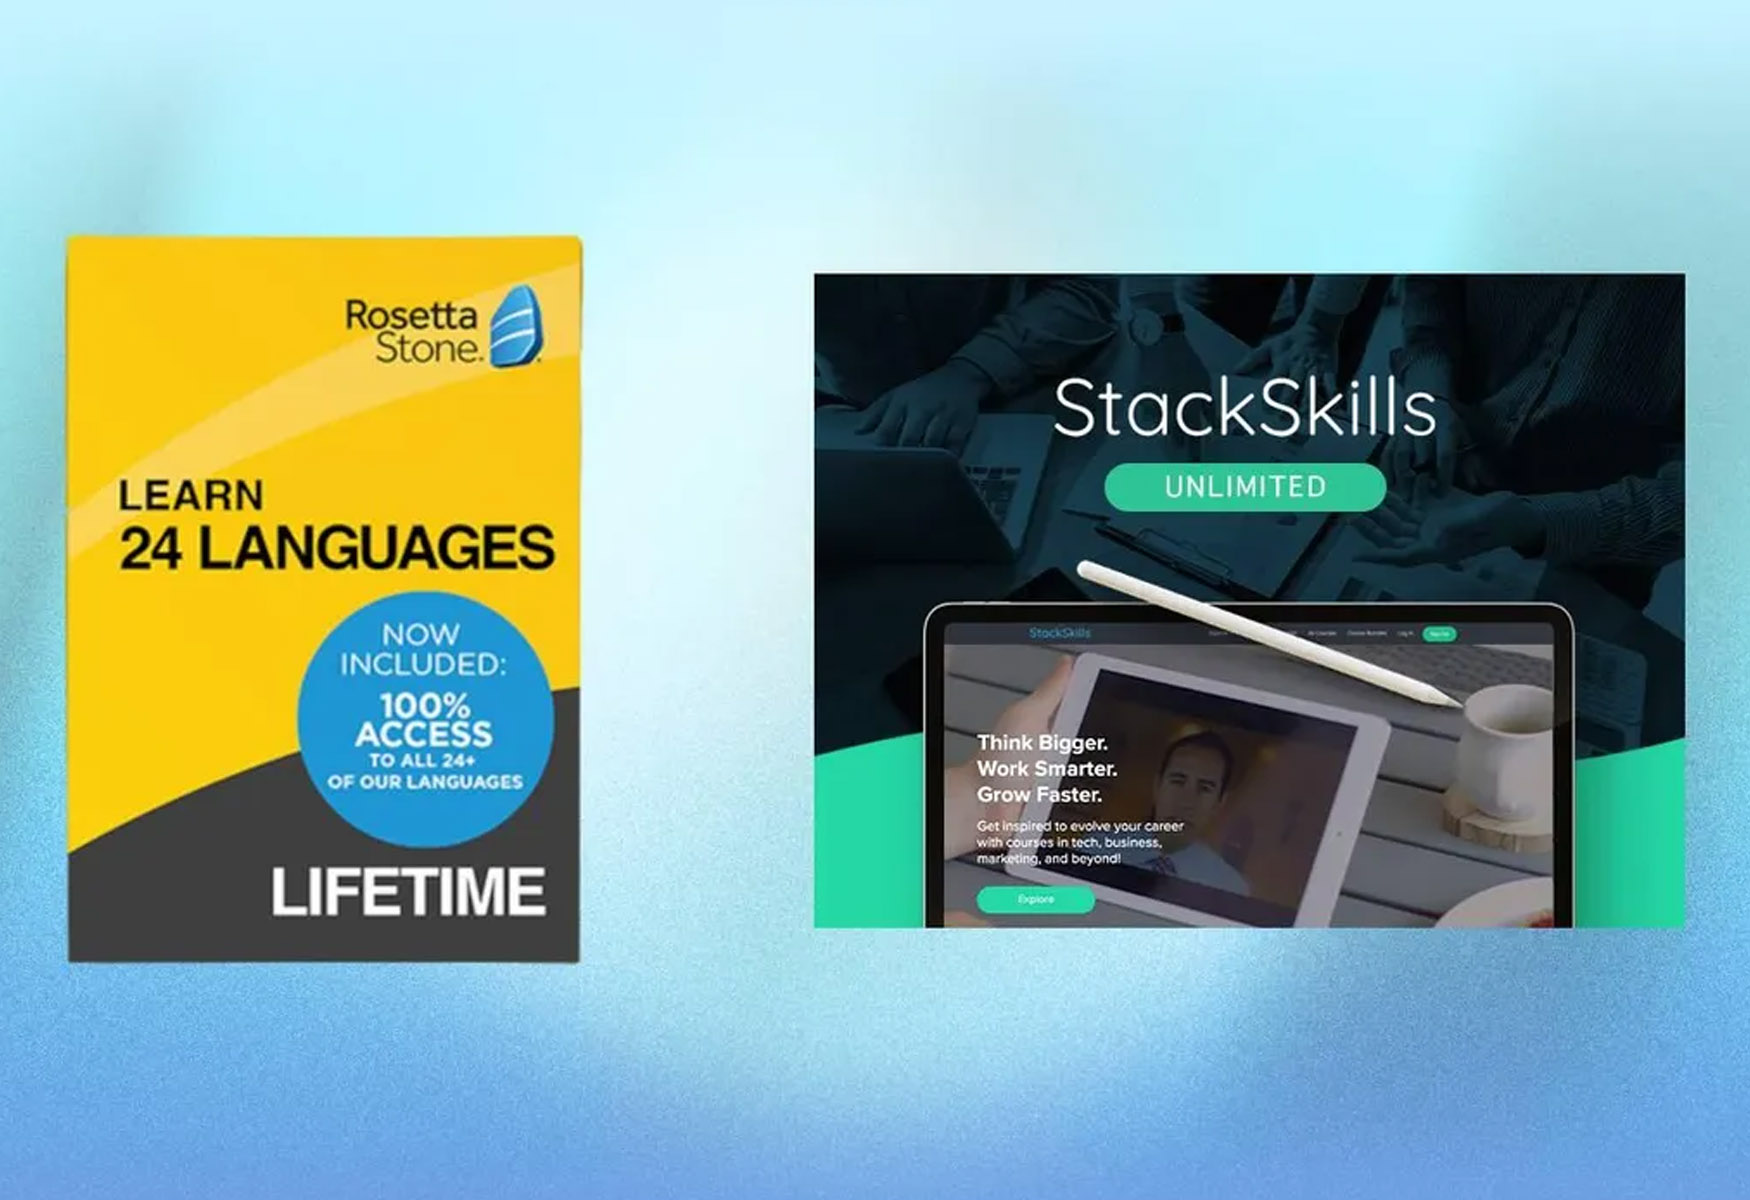 Rosetta Stone And StackSkills Unlimited Bundle: The Perfect Christmas Gift For Language Enthusiasts